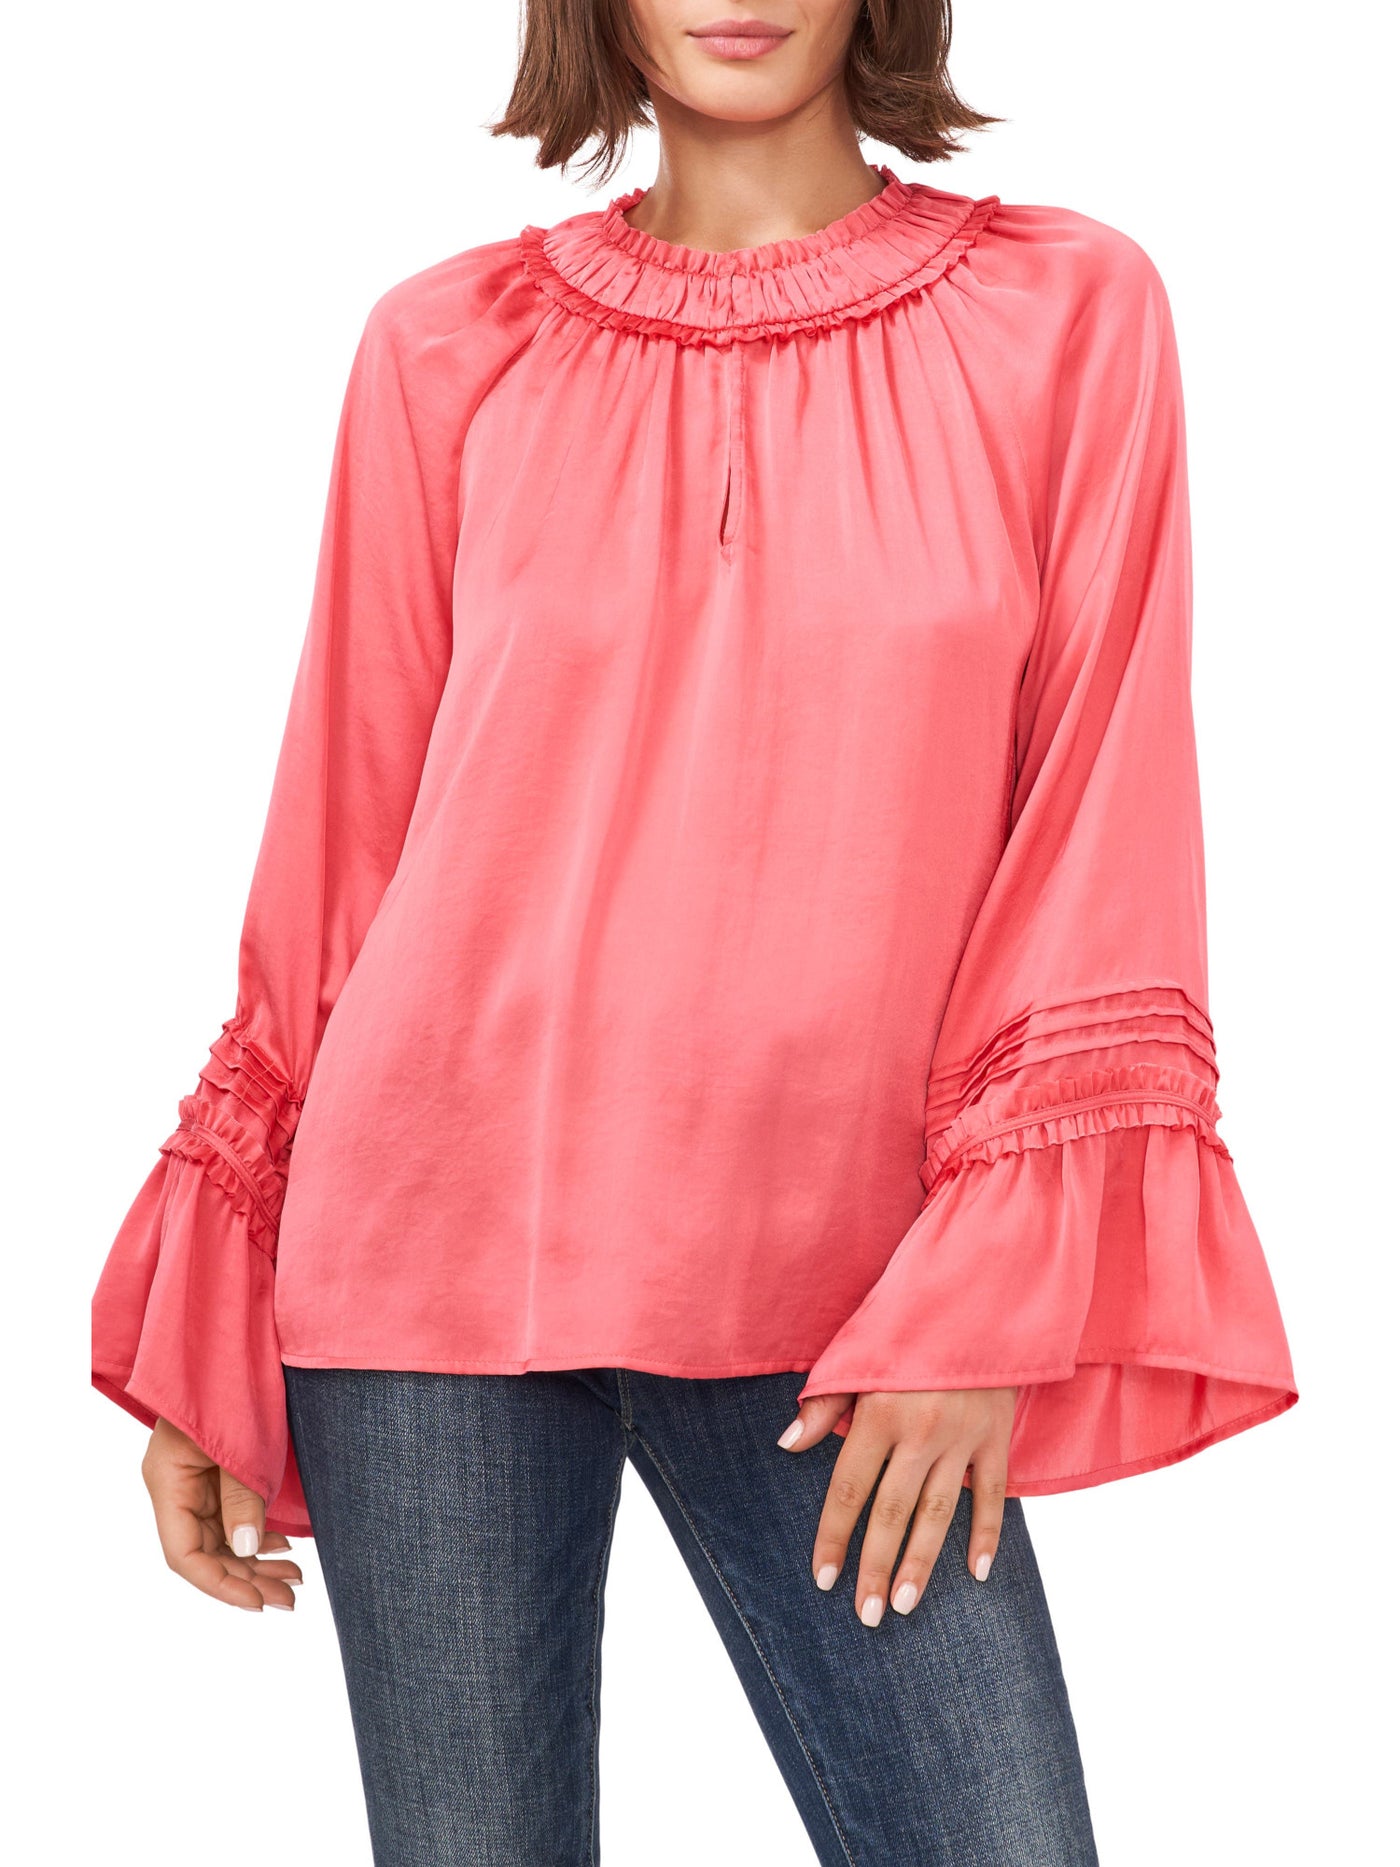 VINCE CAMUTO Womens Pink Ruffled Hook And Eye Closure Bell Sleeve Keyhole Blouse XL